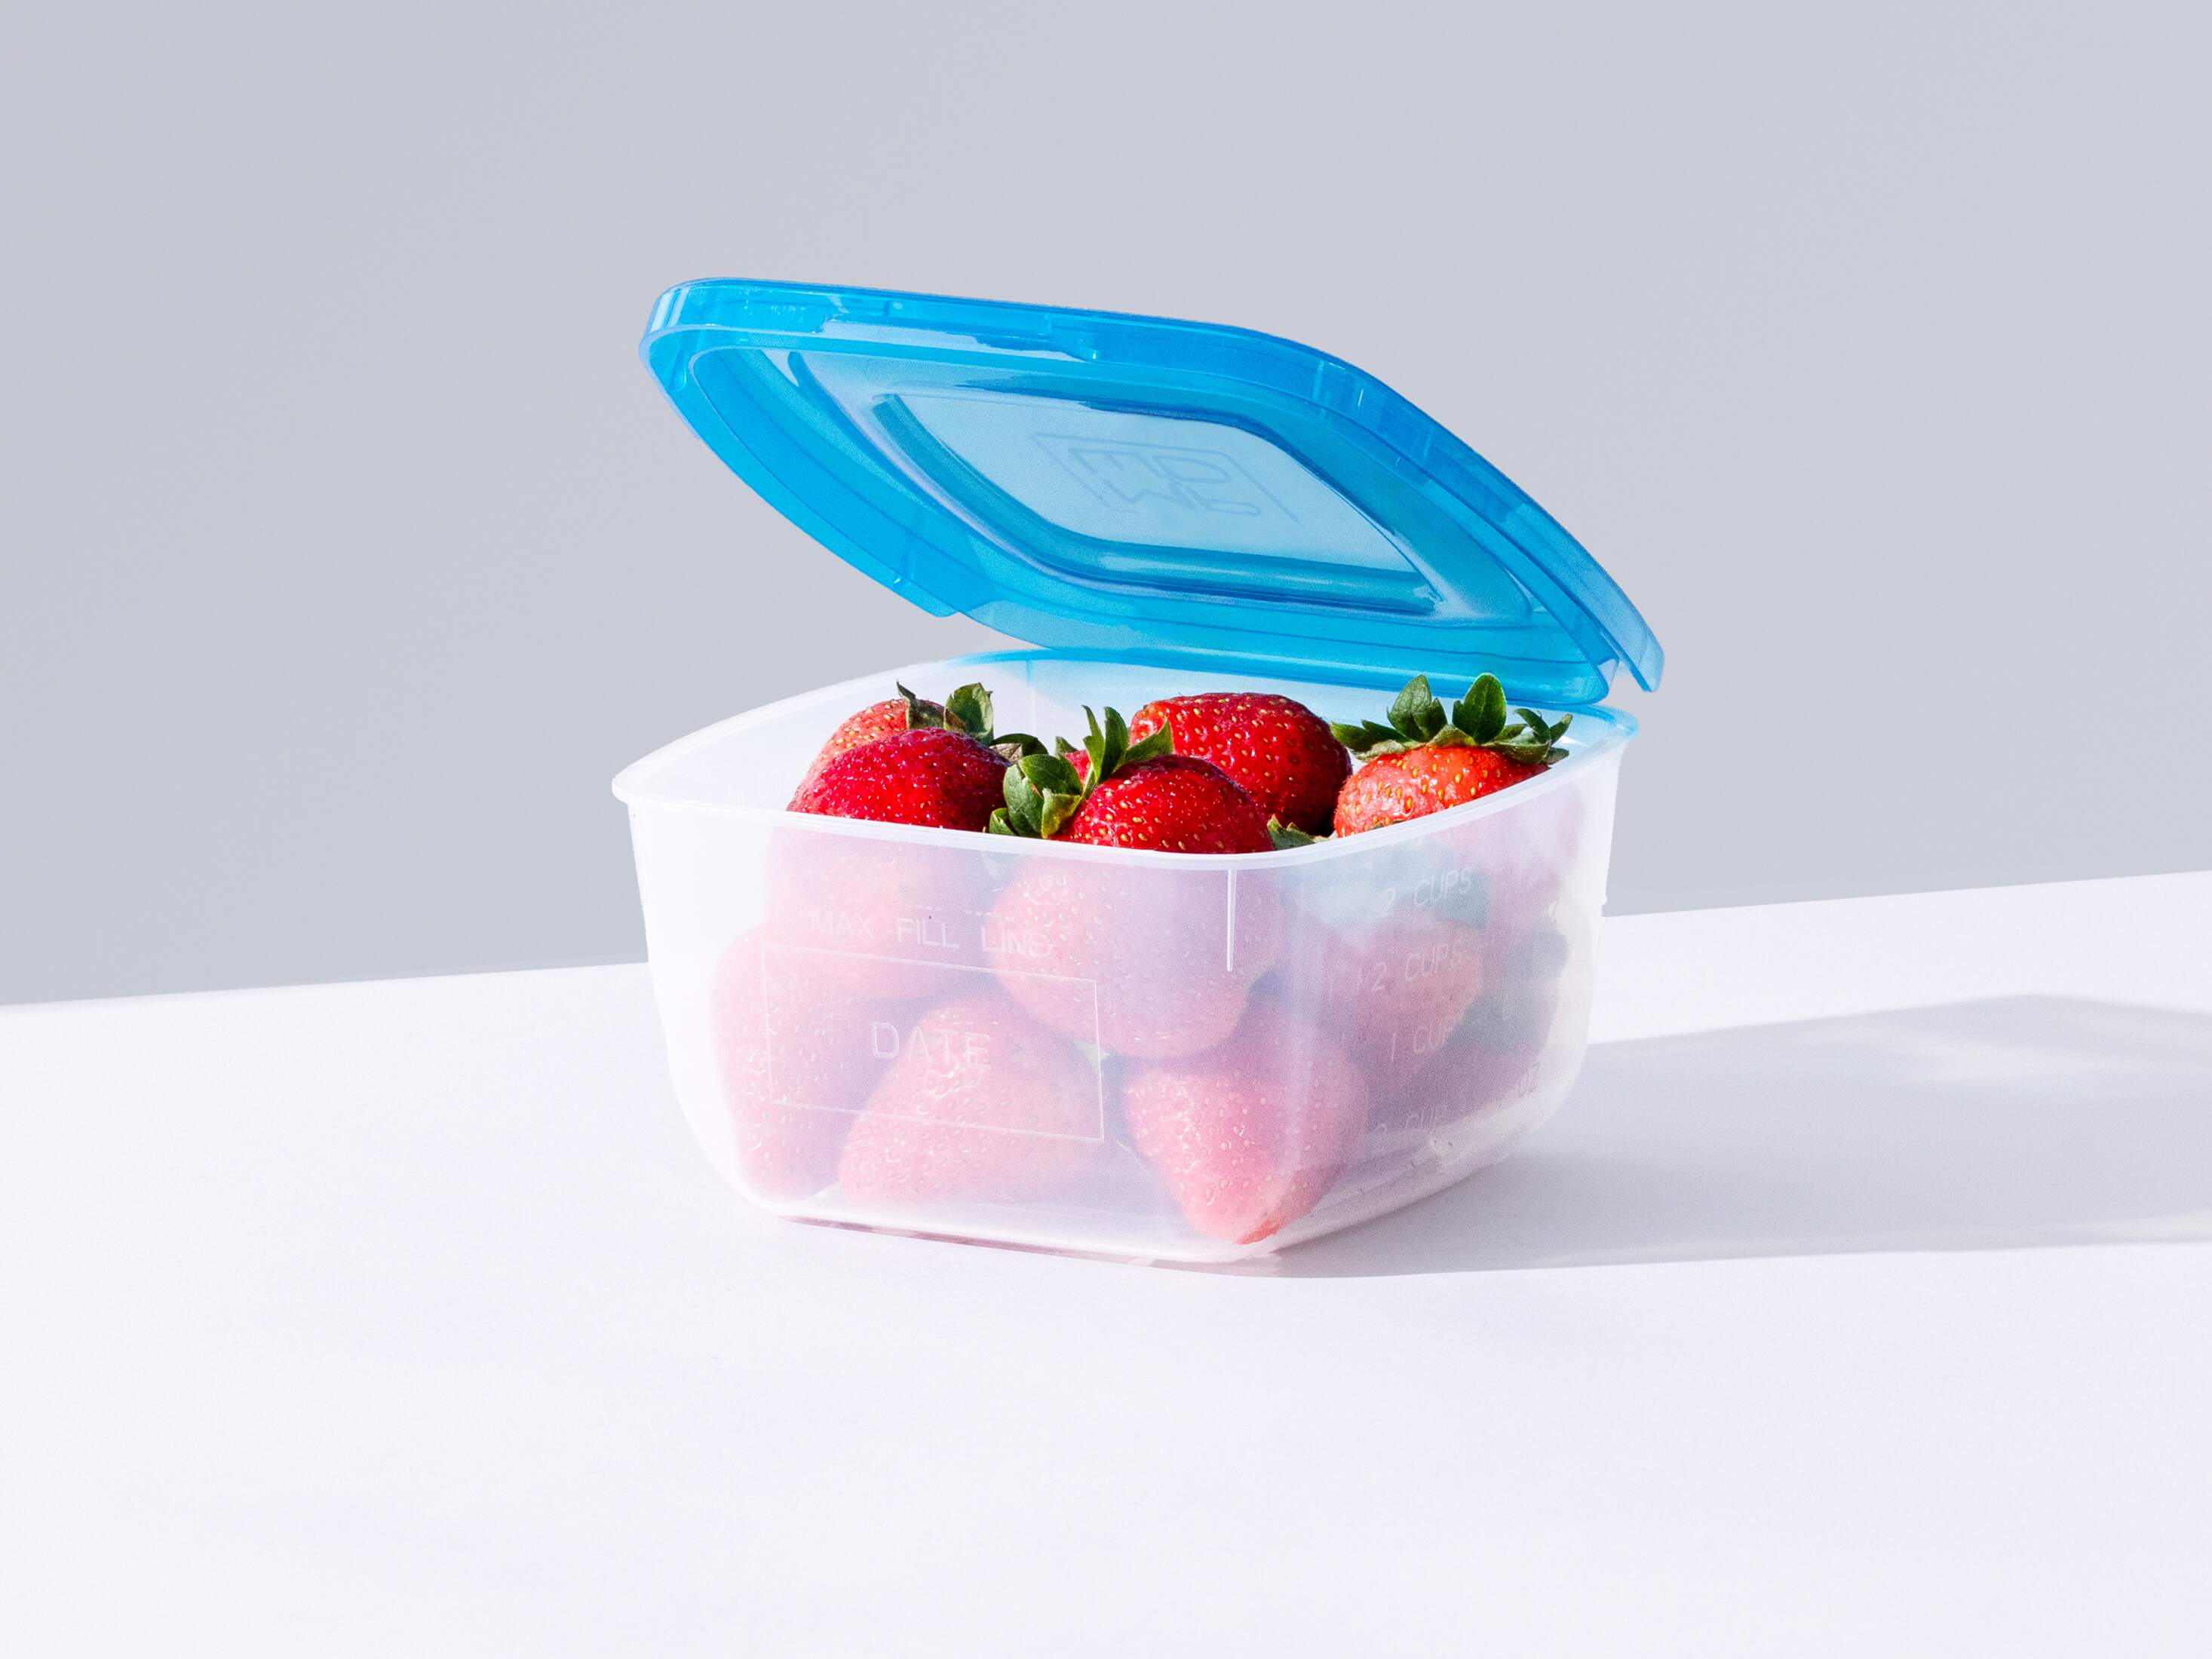 Wholesale Mr. Handy 2 Section Food Container- 38oz BLUE SILICONE LID